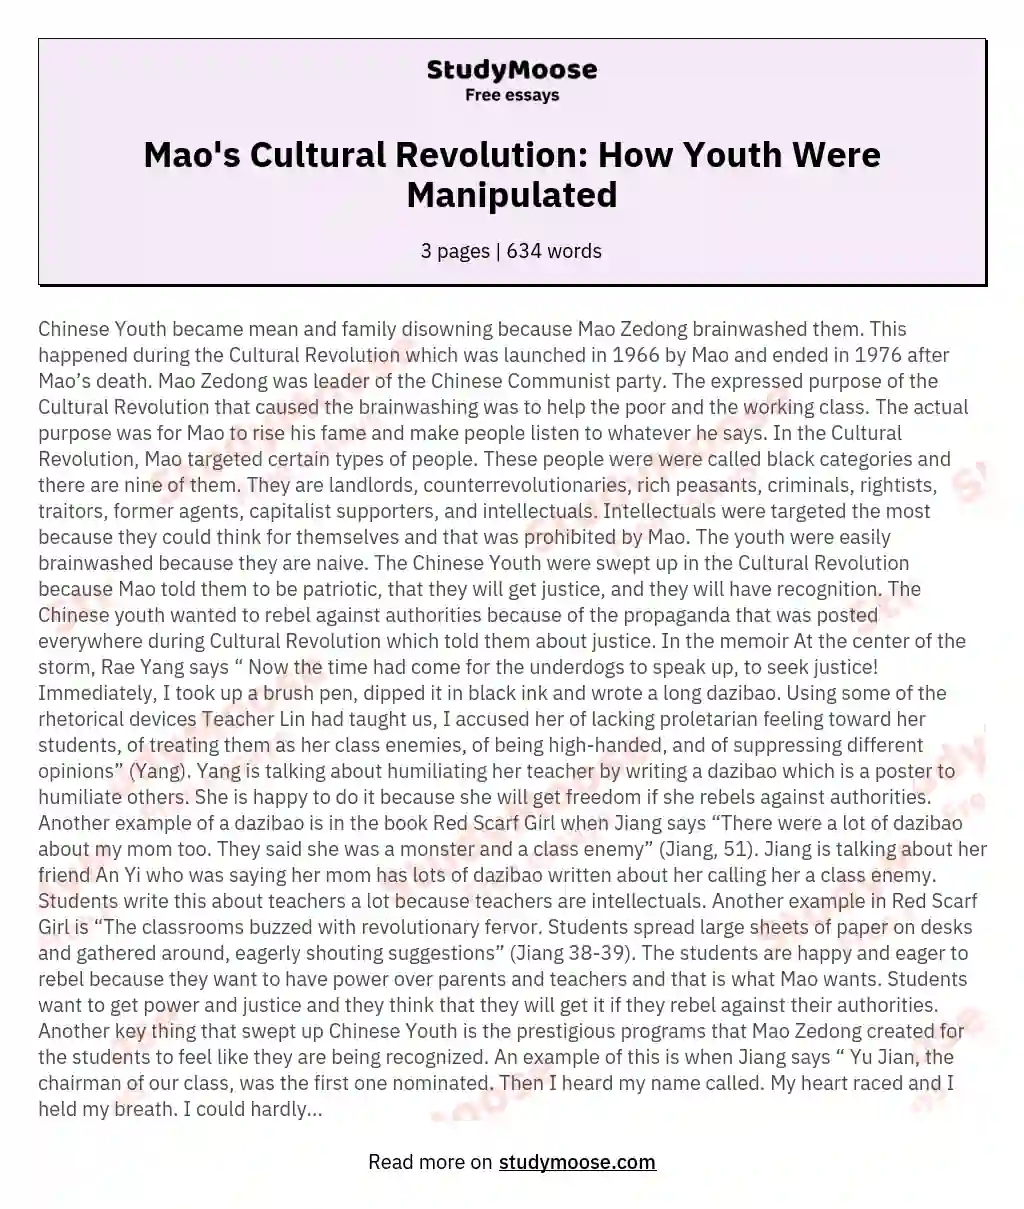 Mao's Cultural Revolution: How Youth Were Manipulated essay